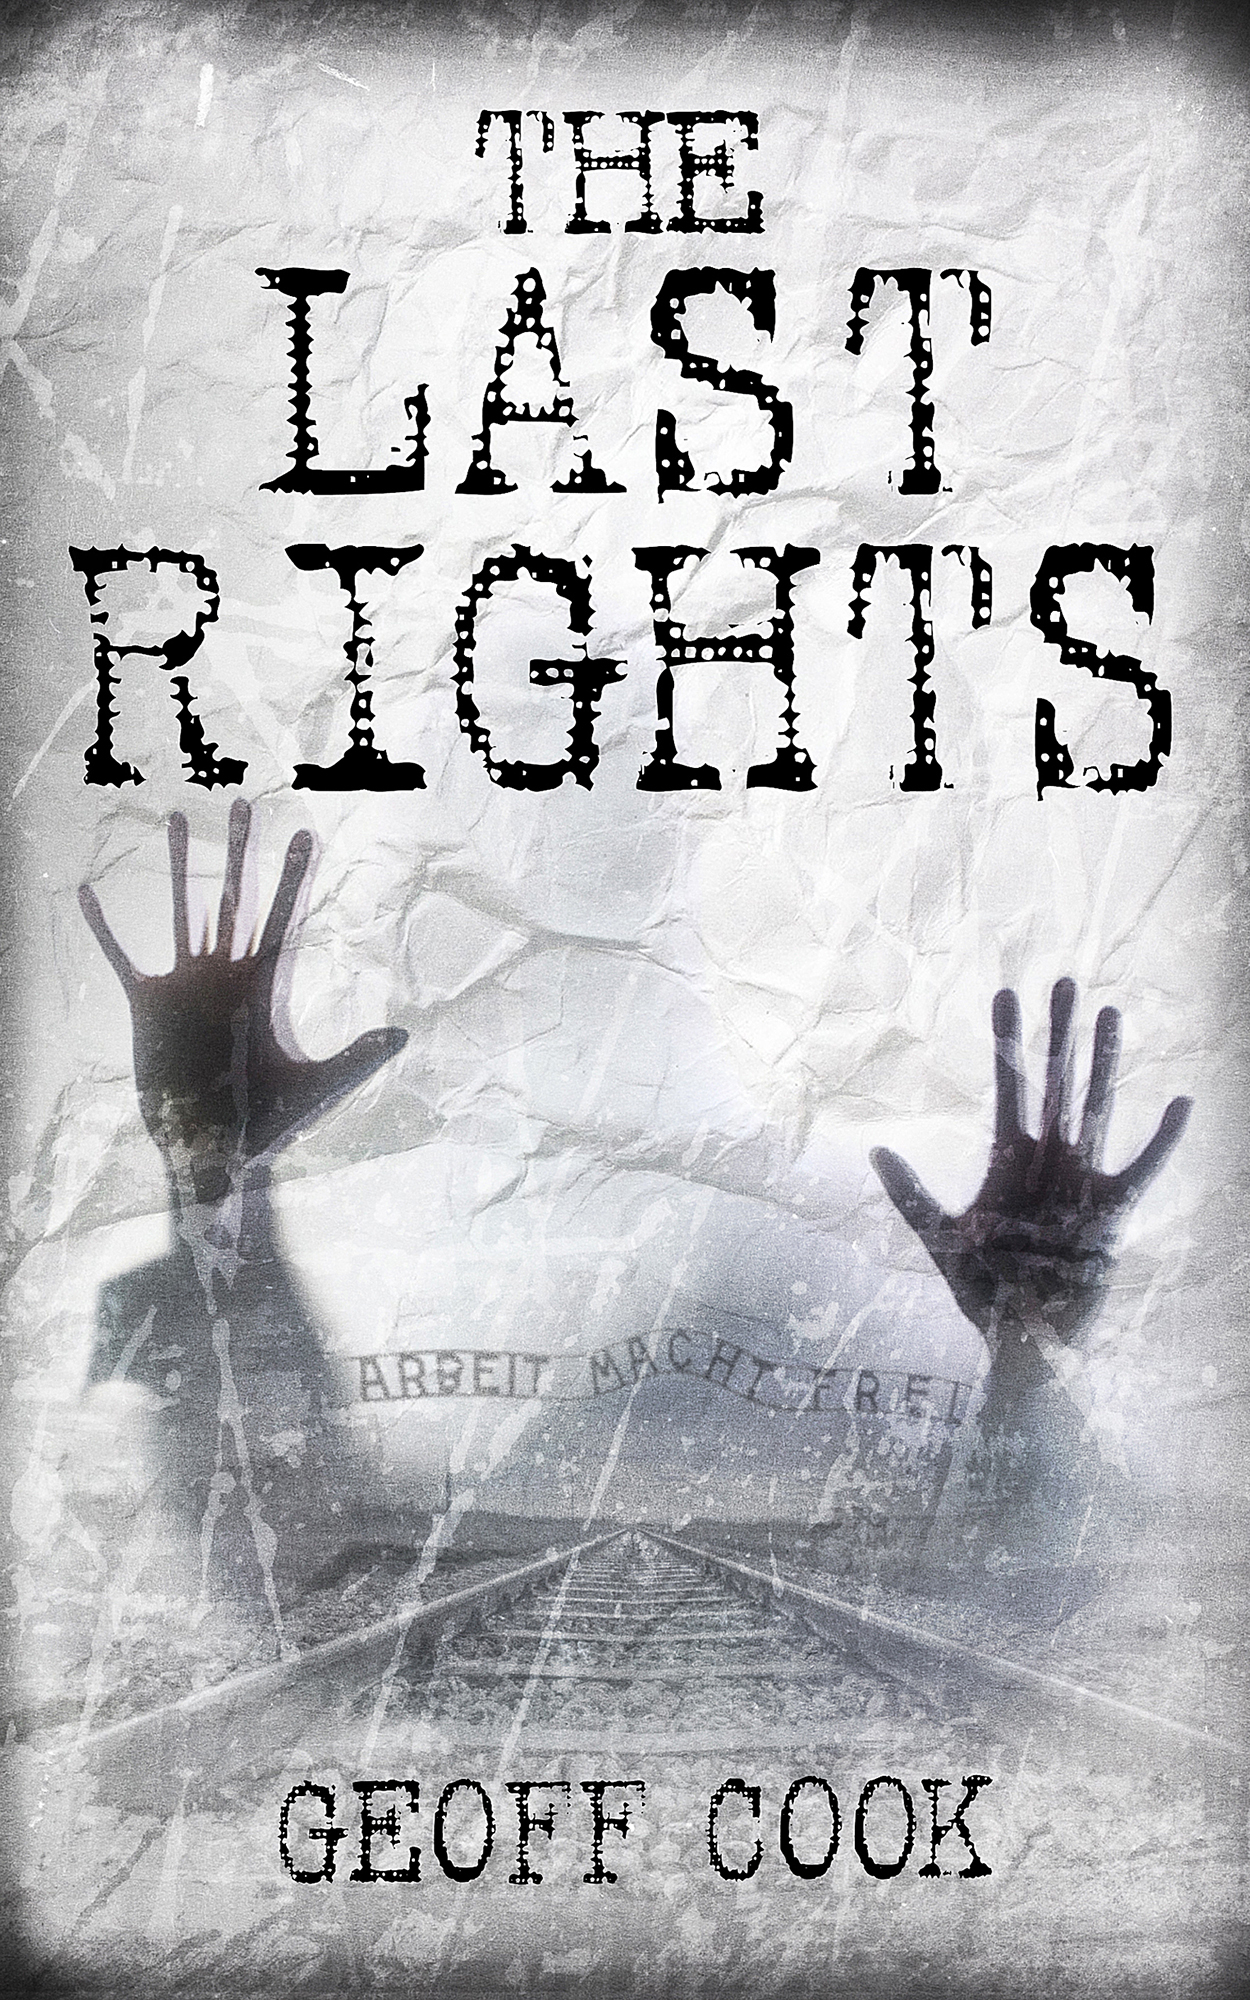 'The Last Rights' latest novel from UK author Geoff Cook is published